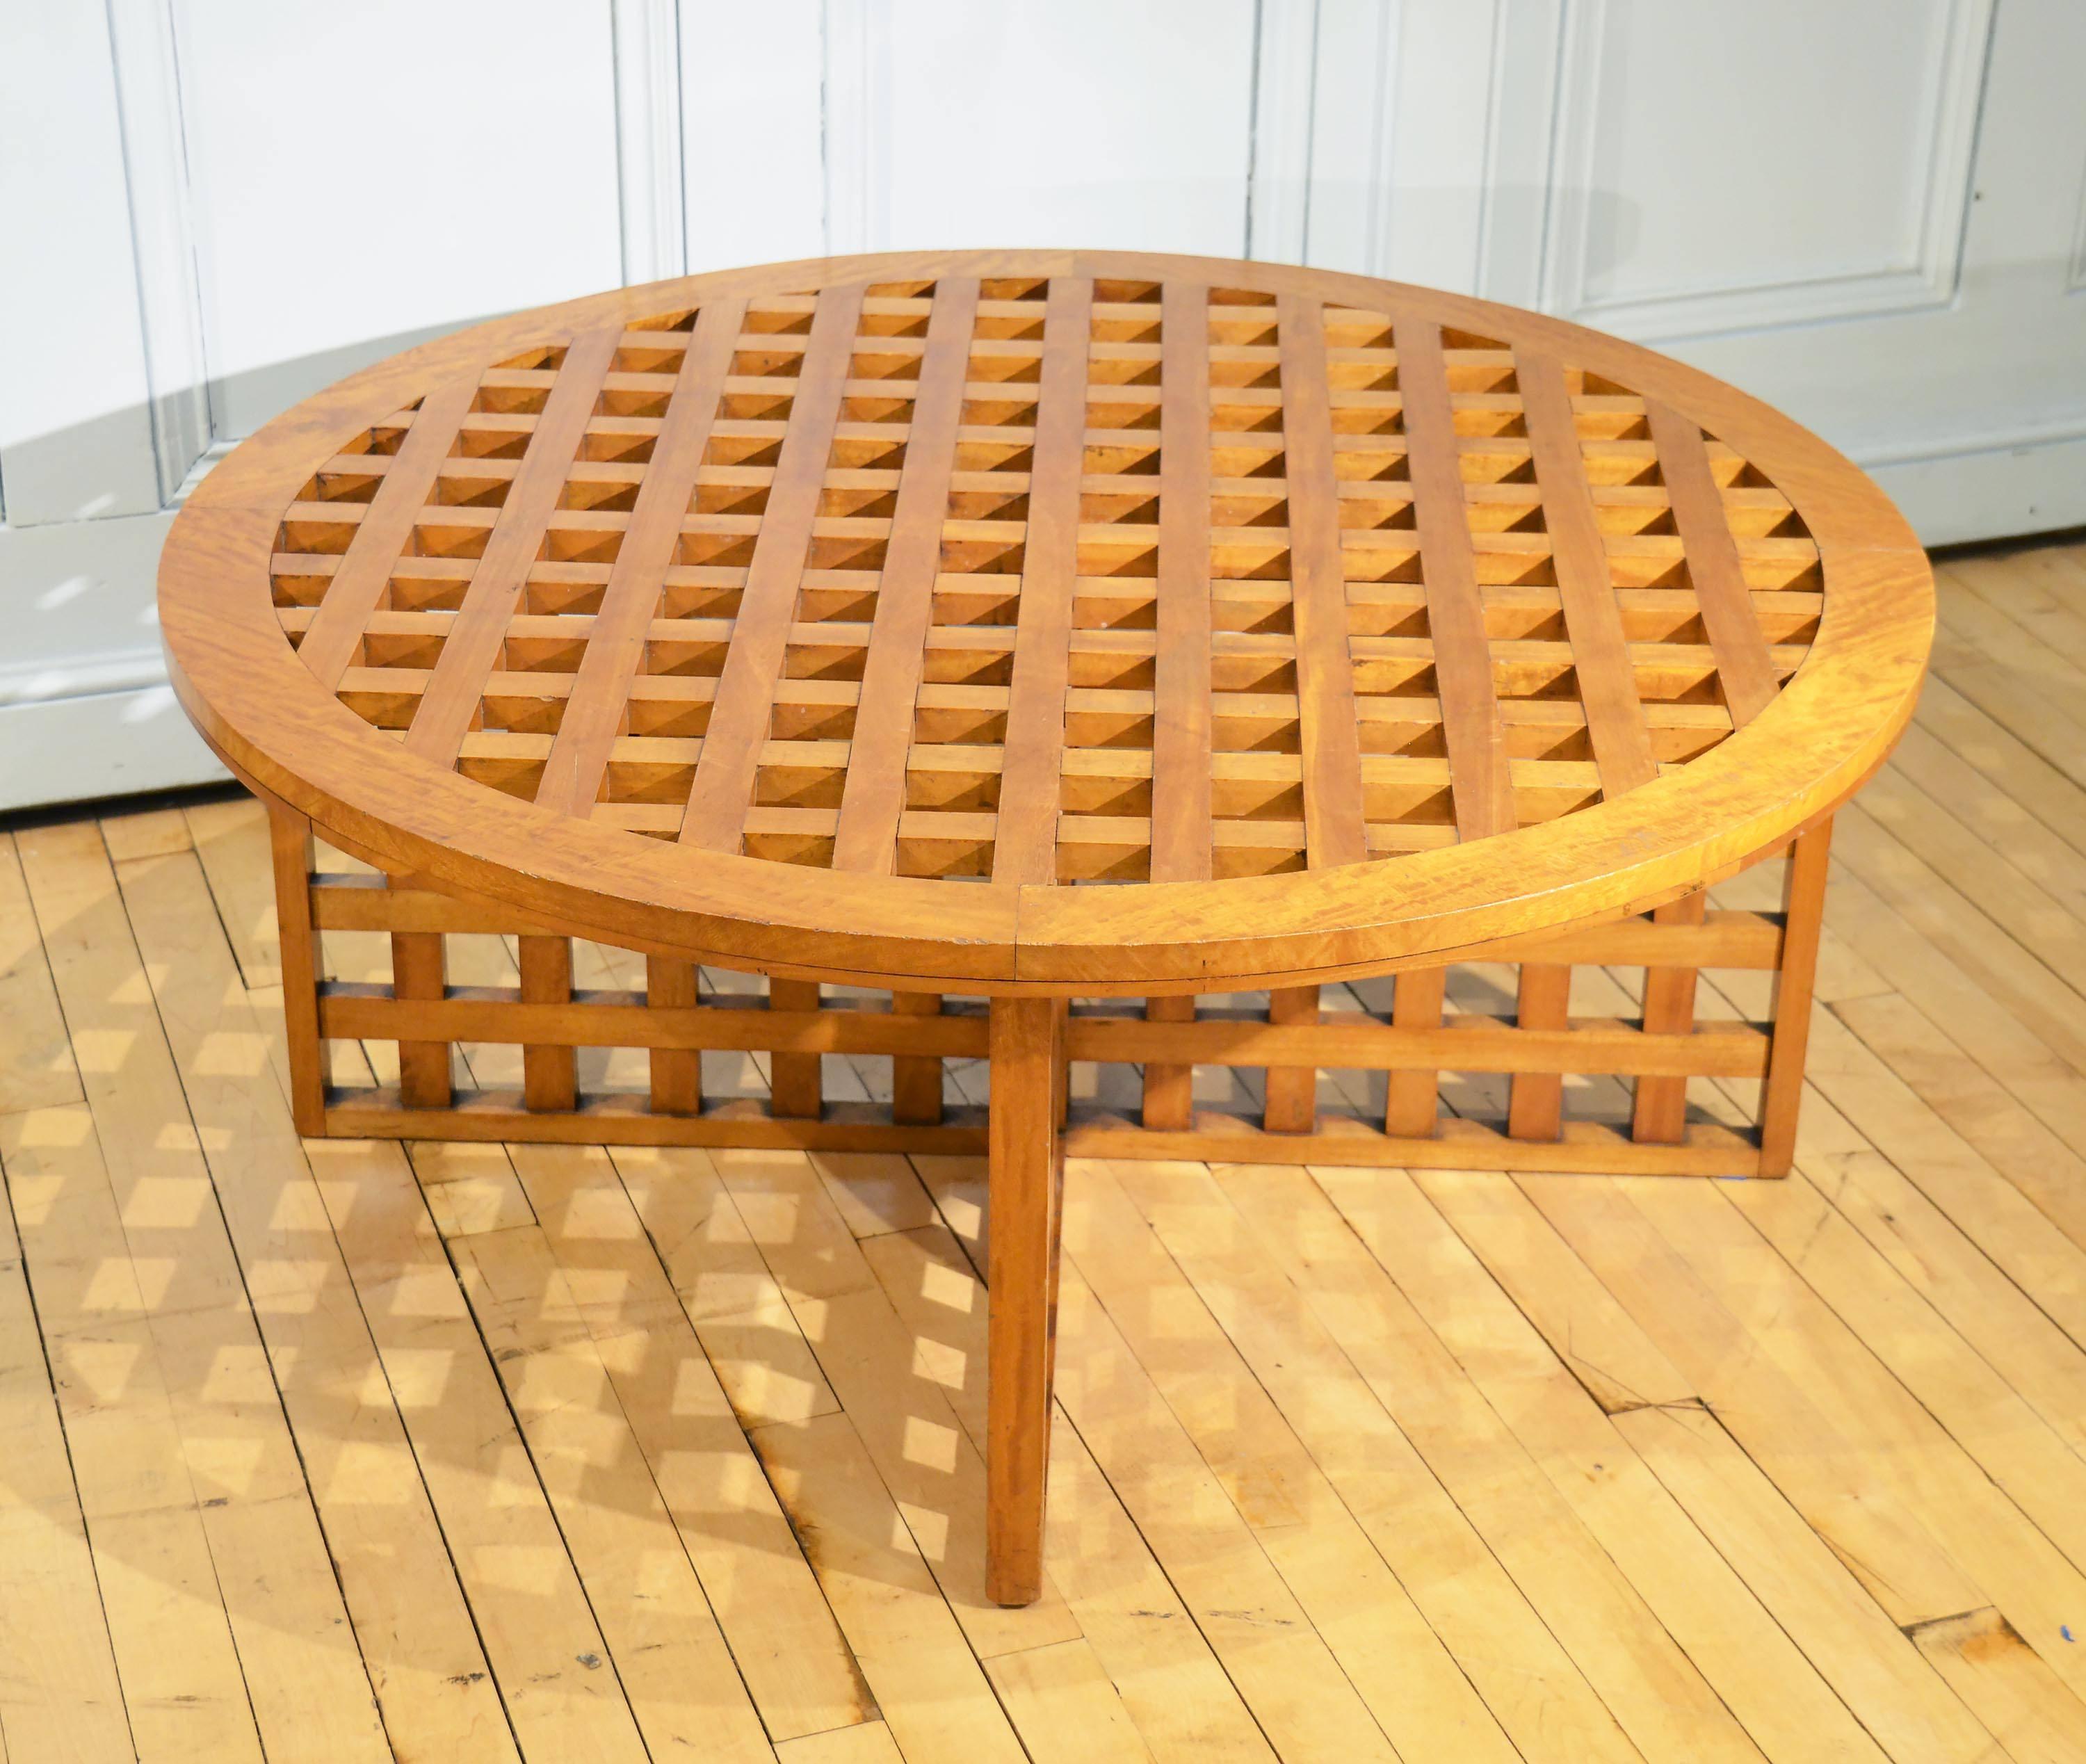 This lovely lattice design satinwood table is English and mid-20th century. It is a very sturdy and solid piece that features an unusual styled cross formed base. It measures 39.1/2 in - 101 cm in diameter and 16 in - 41 cm in height. This well